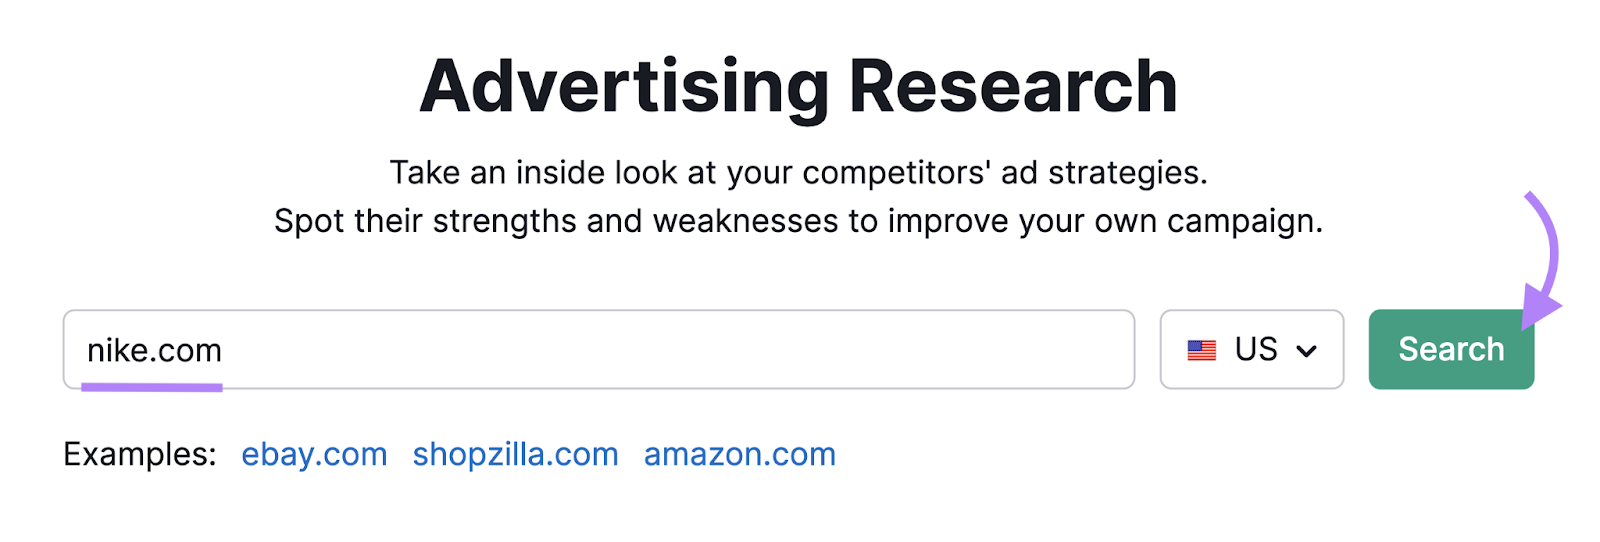 "nike.com" entered into the Advertising Research tool